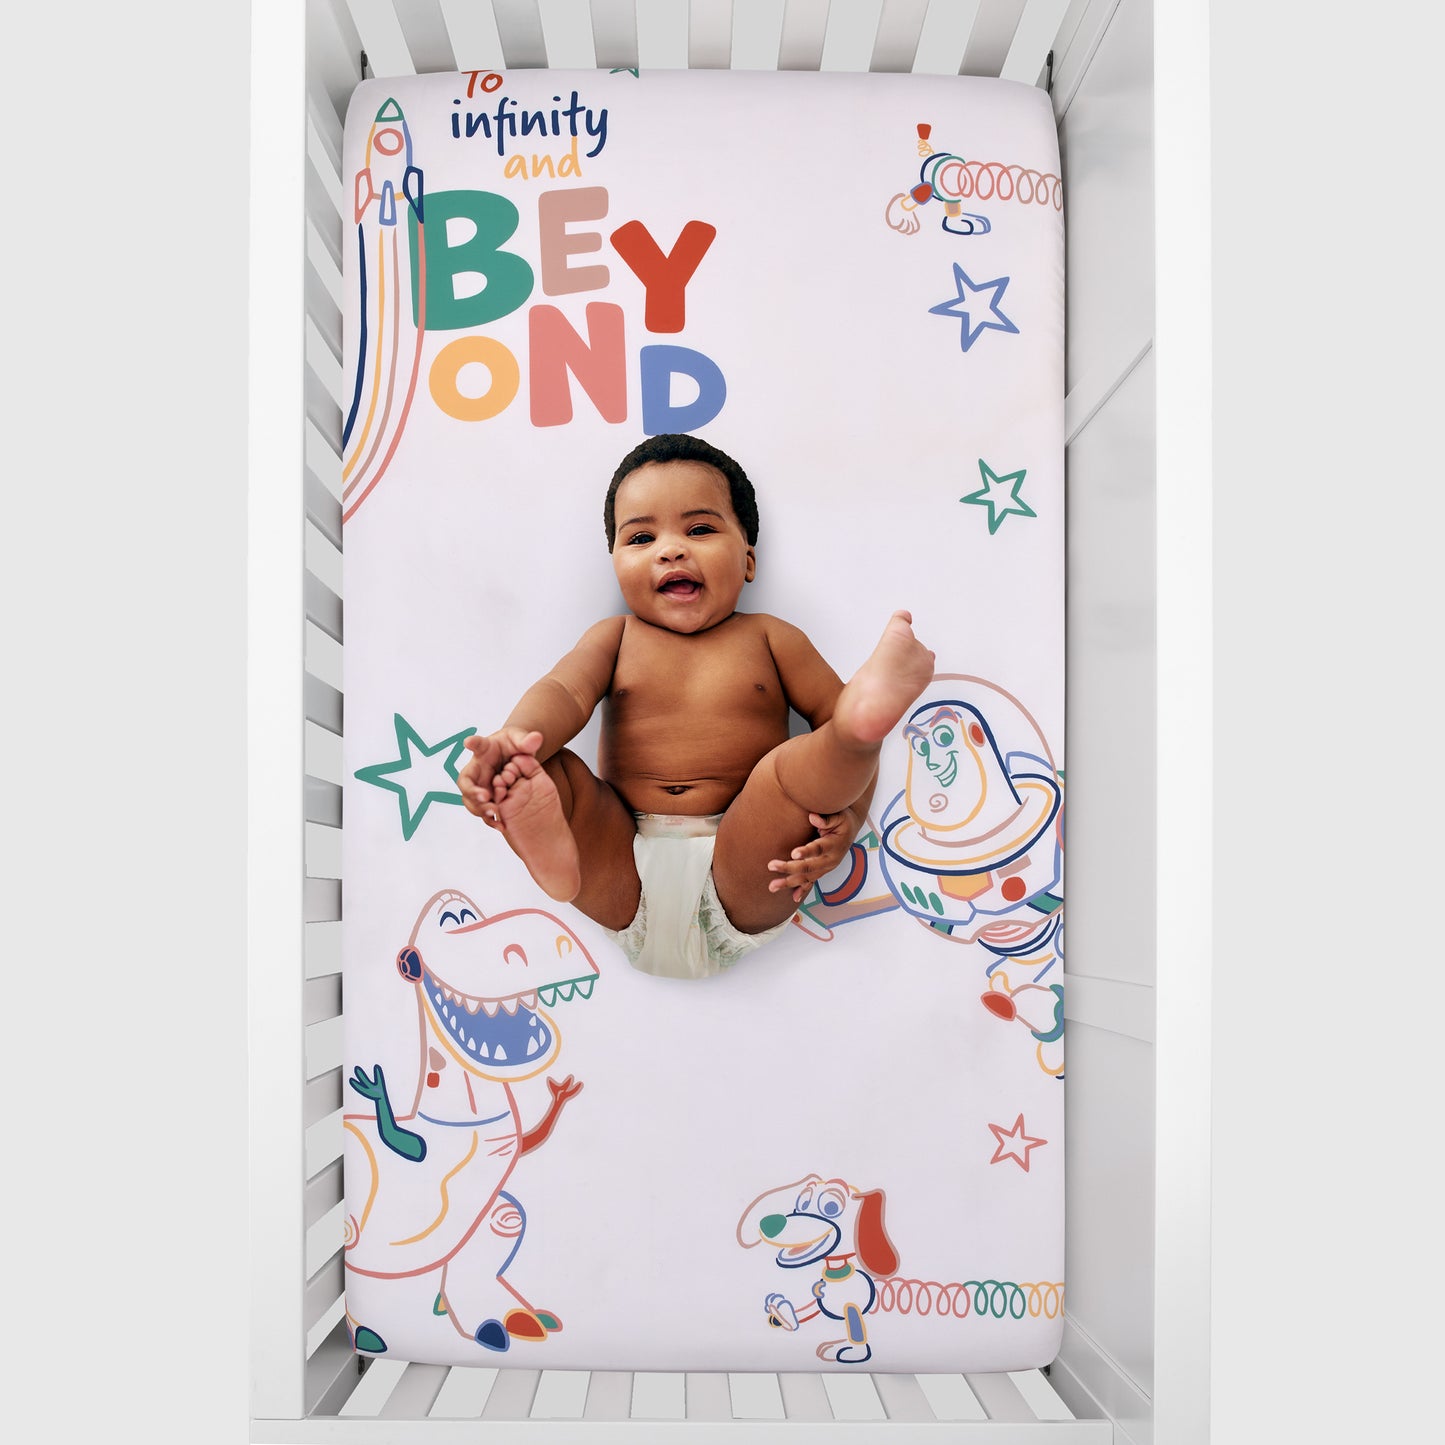 Disney Toy Story Green, Red, Blue and White "To Infinity and Beyond" Color Crazy Nursery Photo Op Fitted Crib Sheet